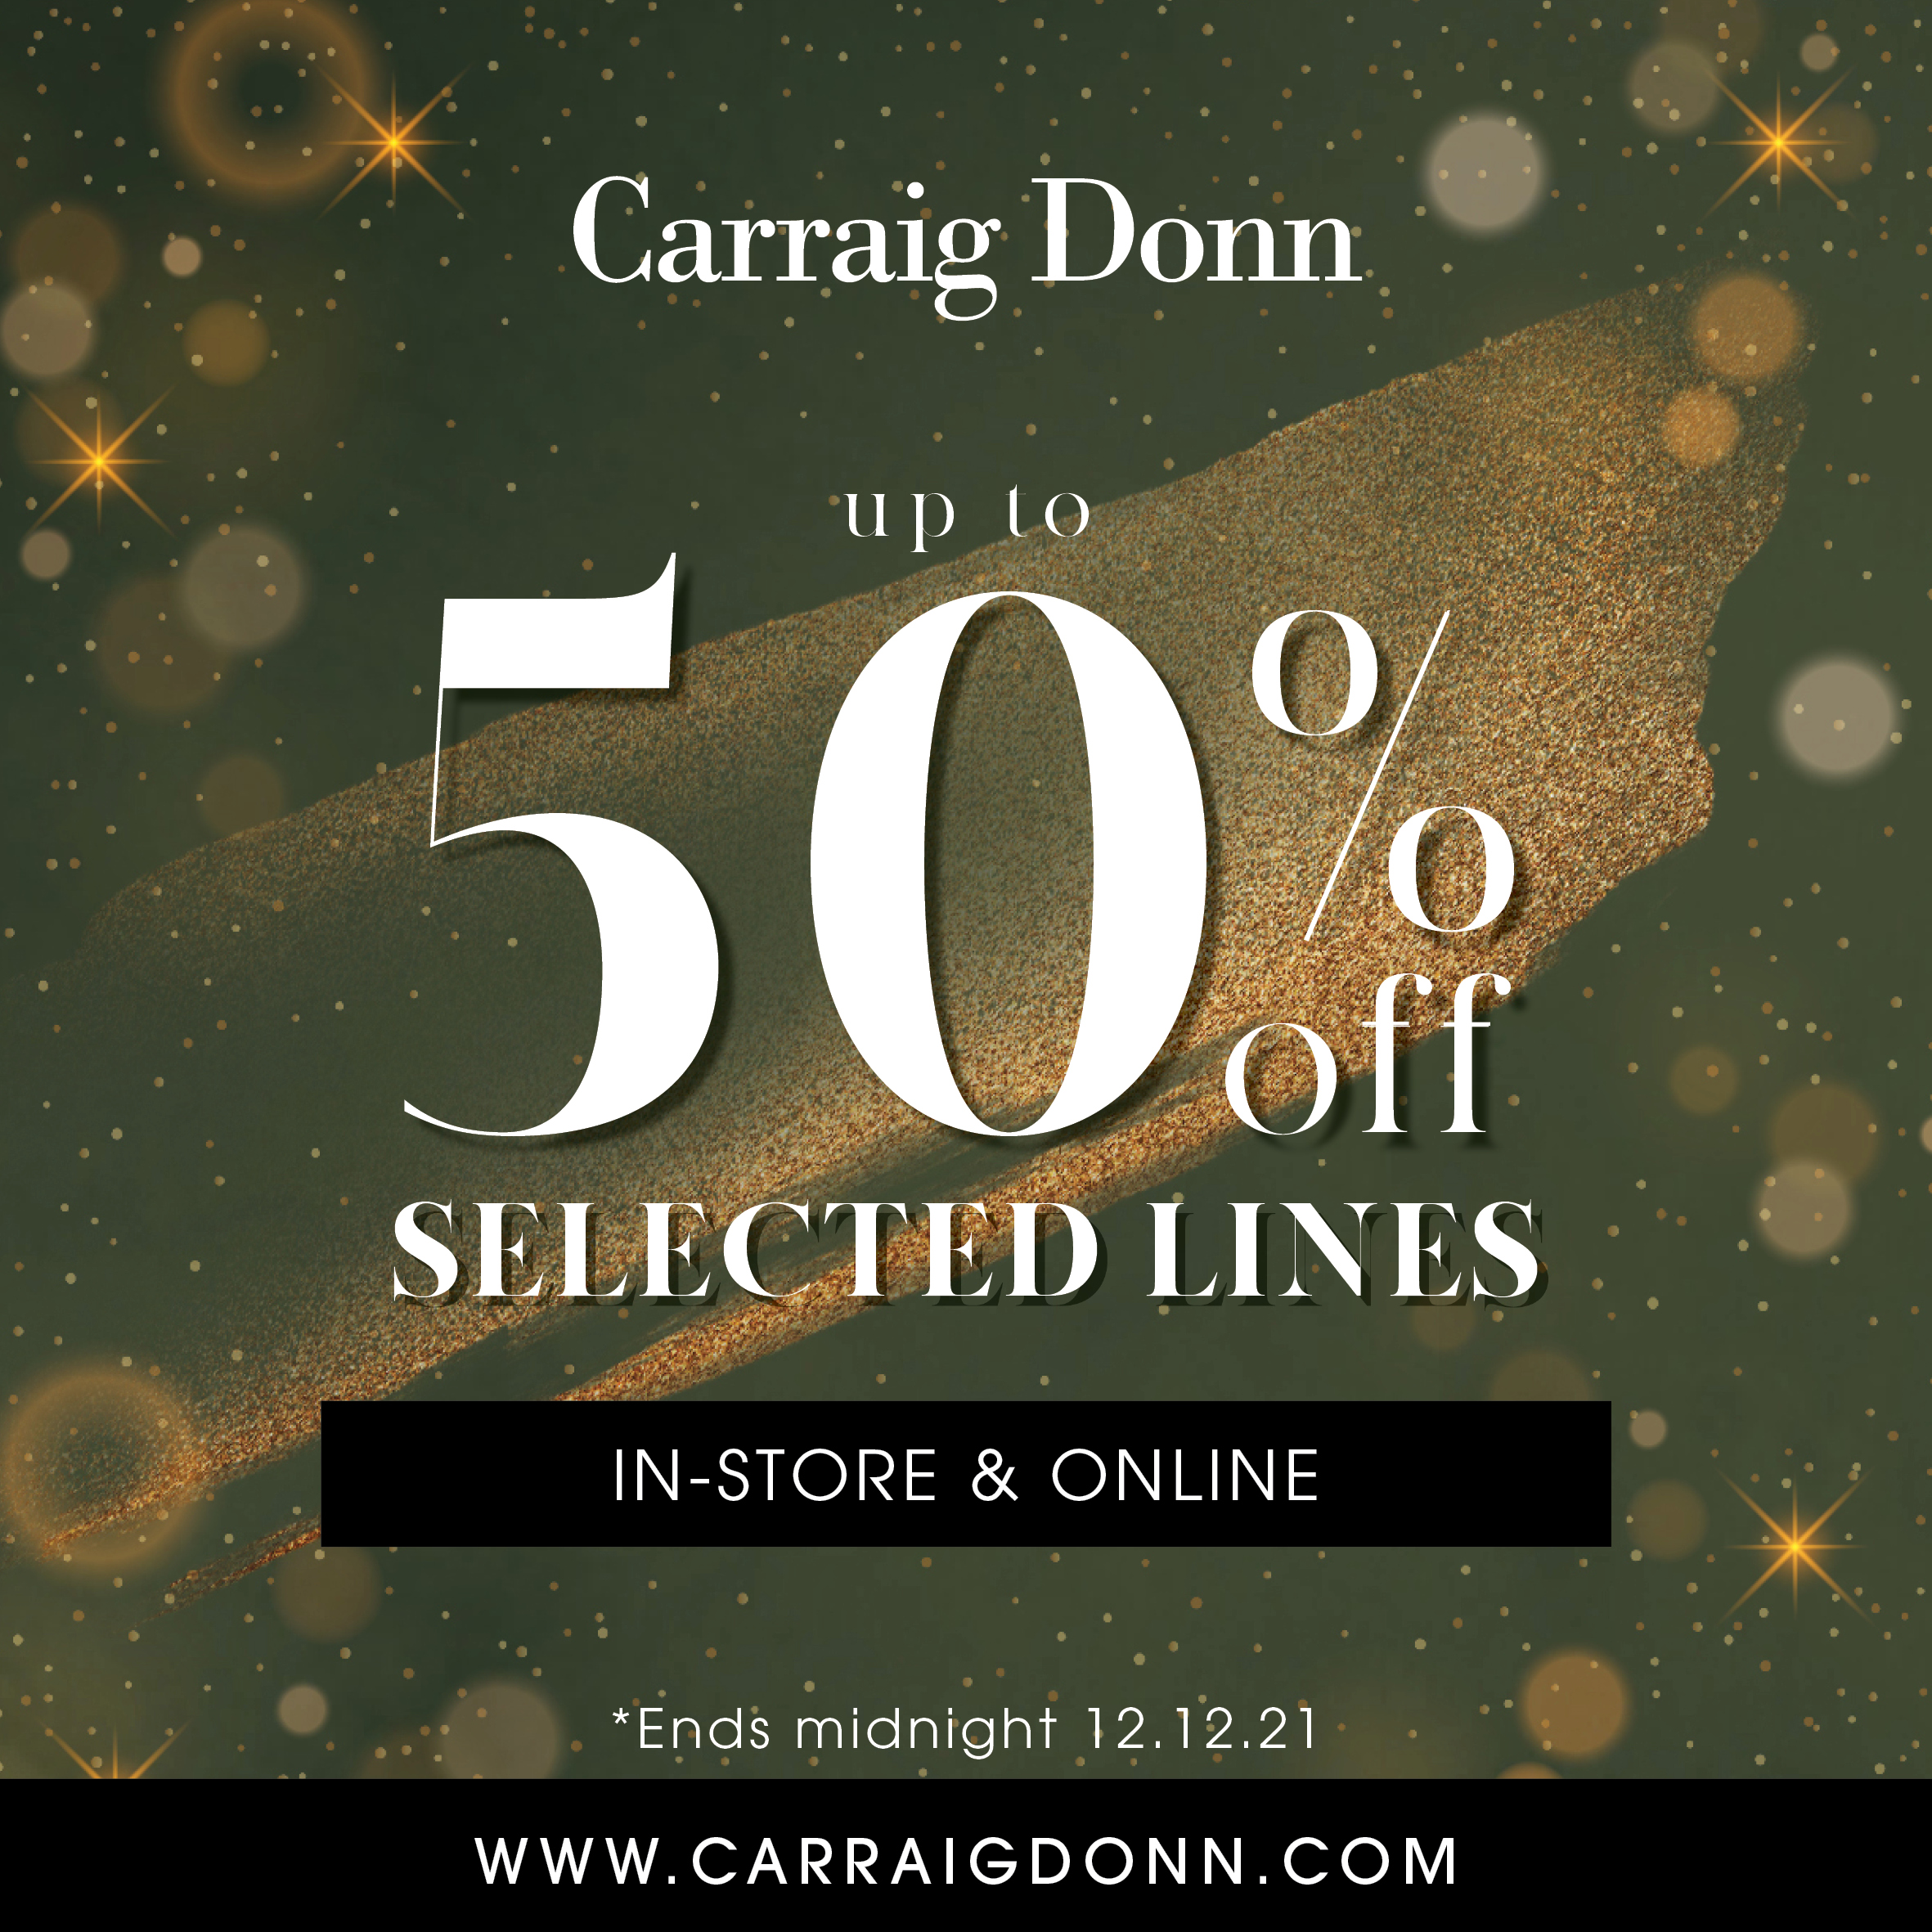 Up to 50% off Selected Lines across Fashion, Gift and Accessories at Carraig Donn for one weekend only!